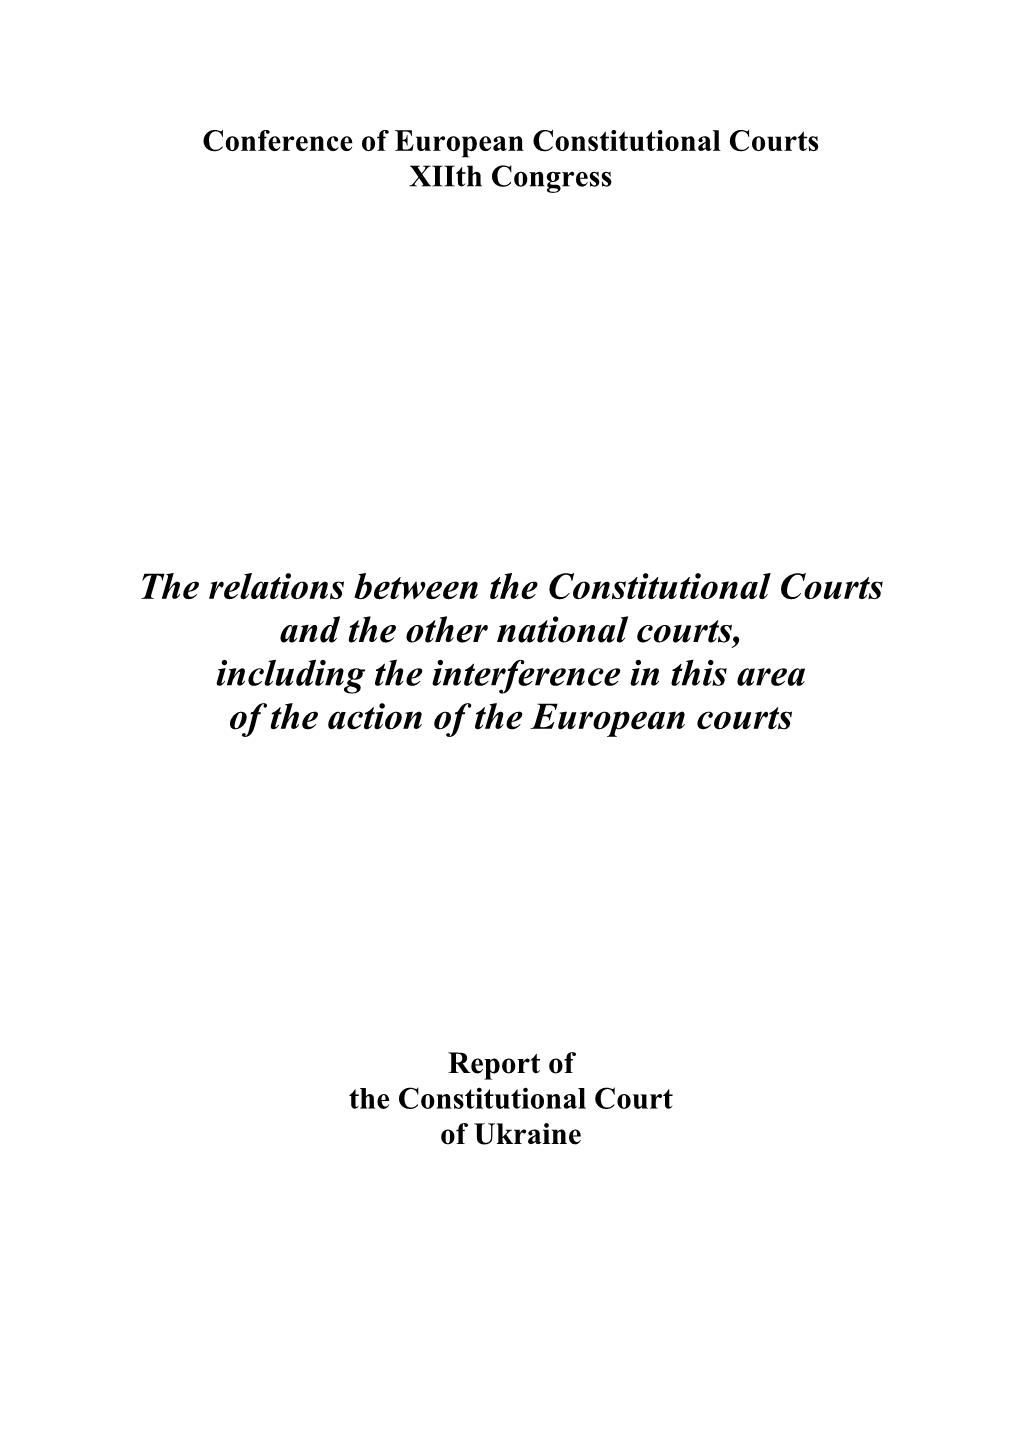 II. Links of the Constitutional Court with Other Courts